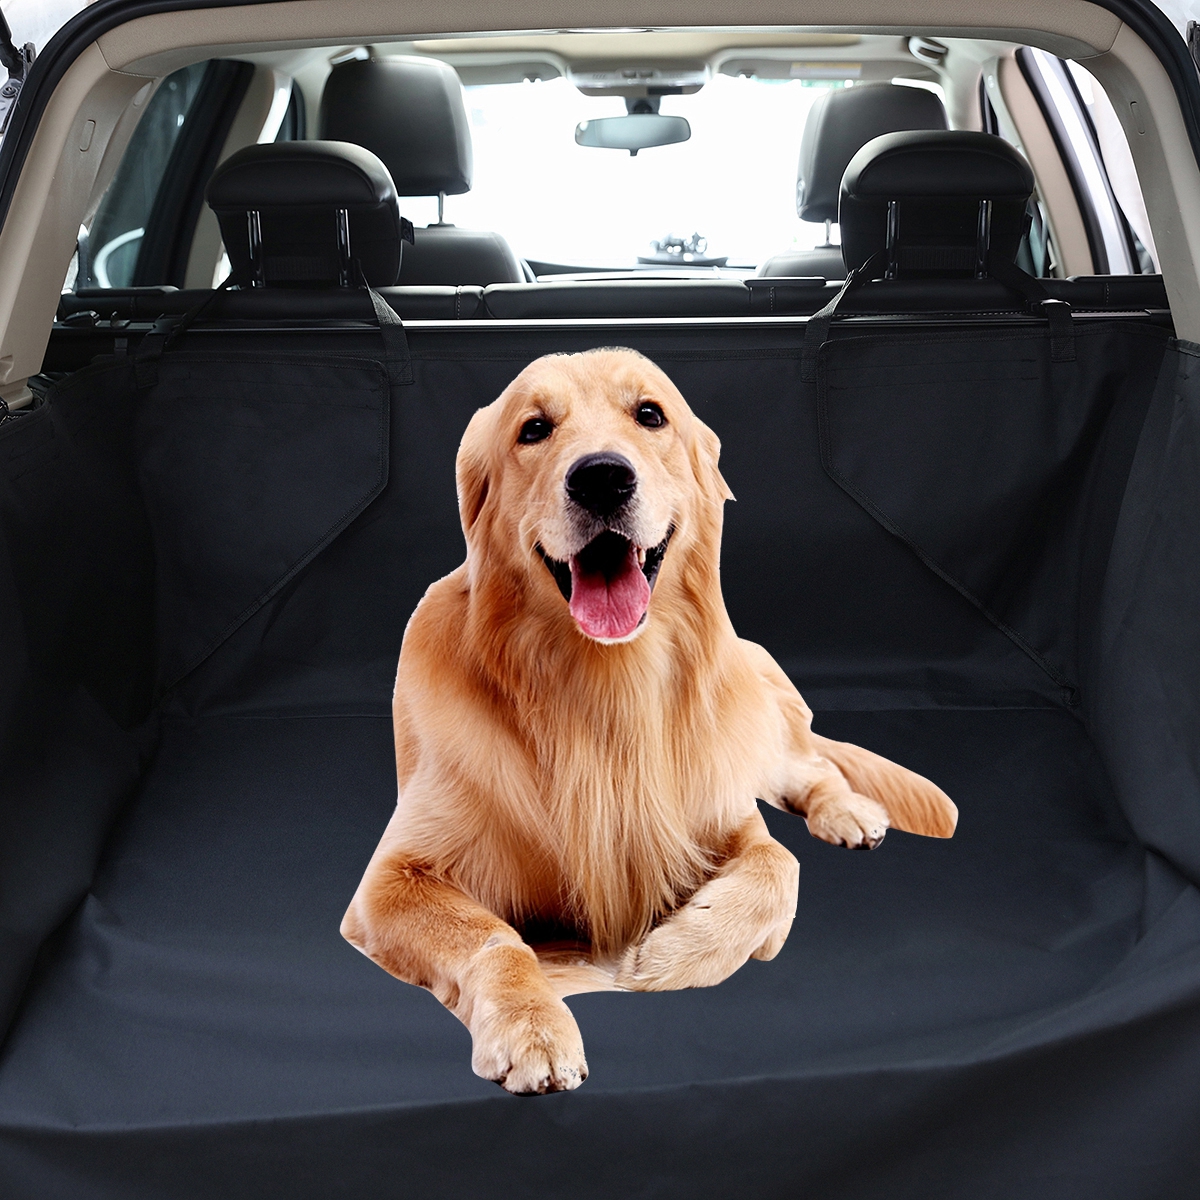 BABYLTRL Dog Car Seat Cover Waterproof Pet Bench Seat Cover Nonslip and Heavy Duty Pet Car Seat Cover for Dogs and Armrest Fits Cars Trucks and SUVs S